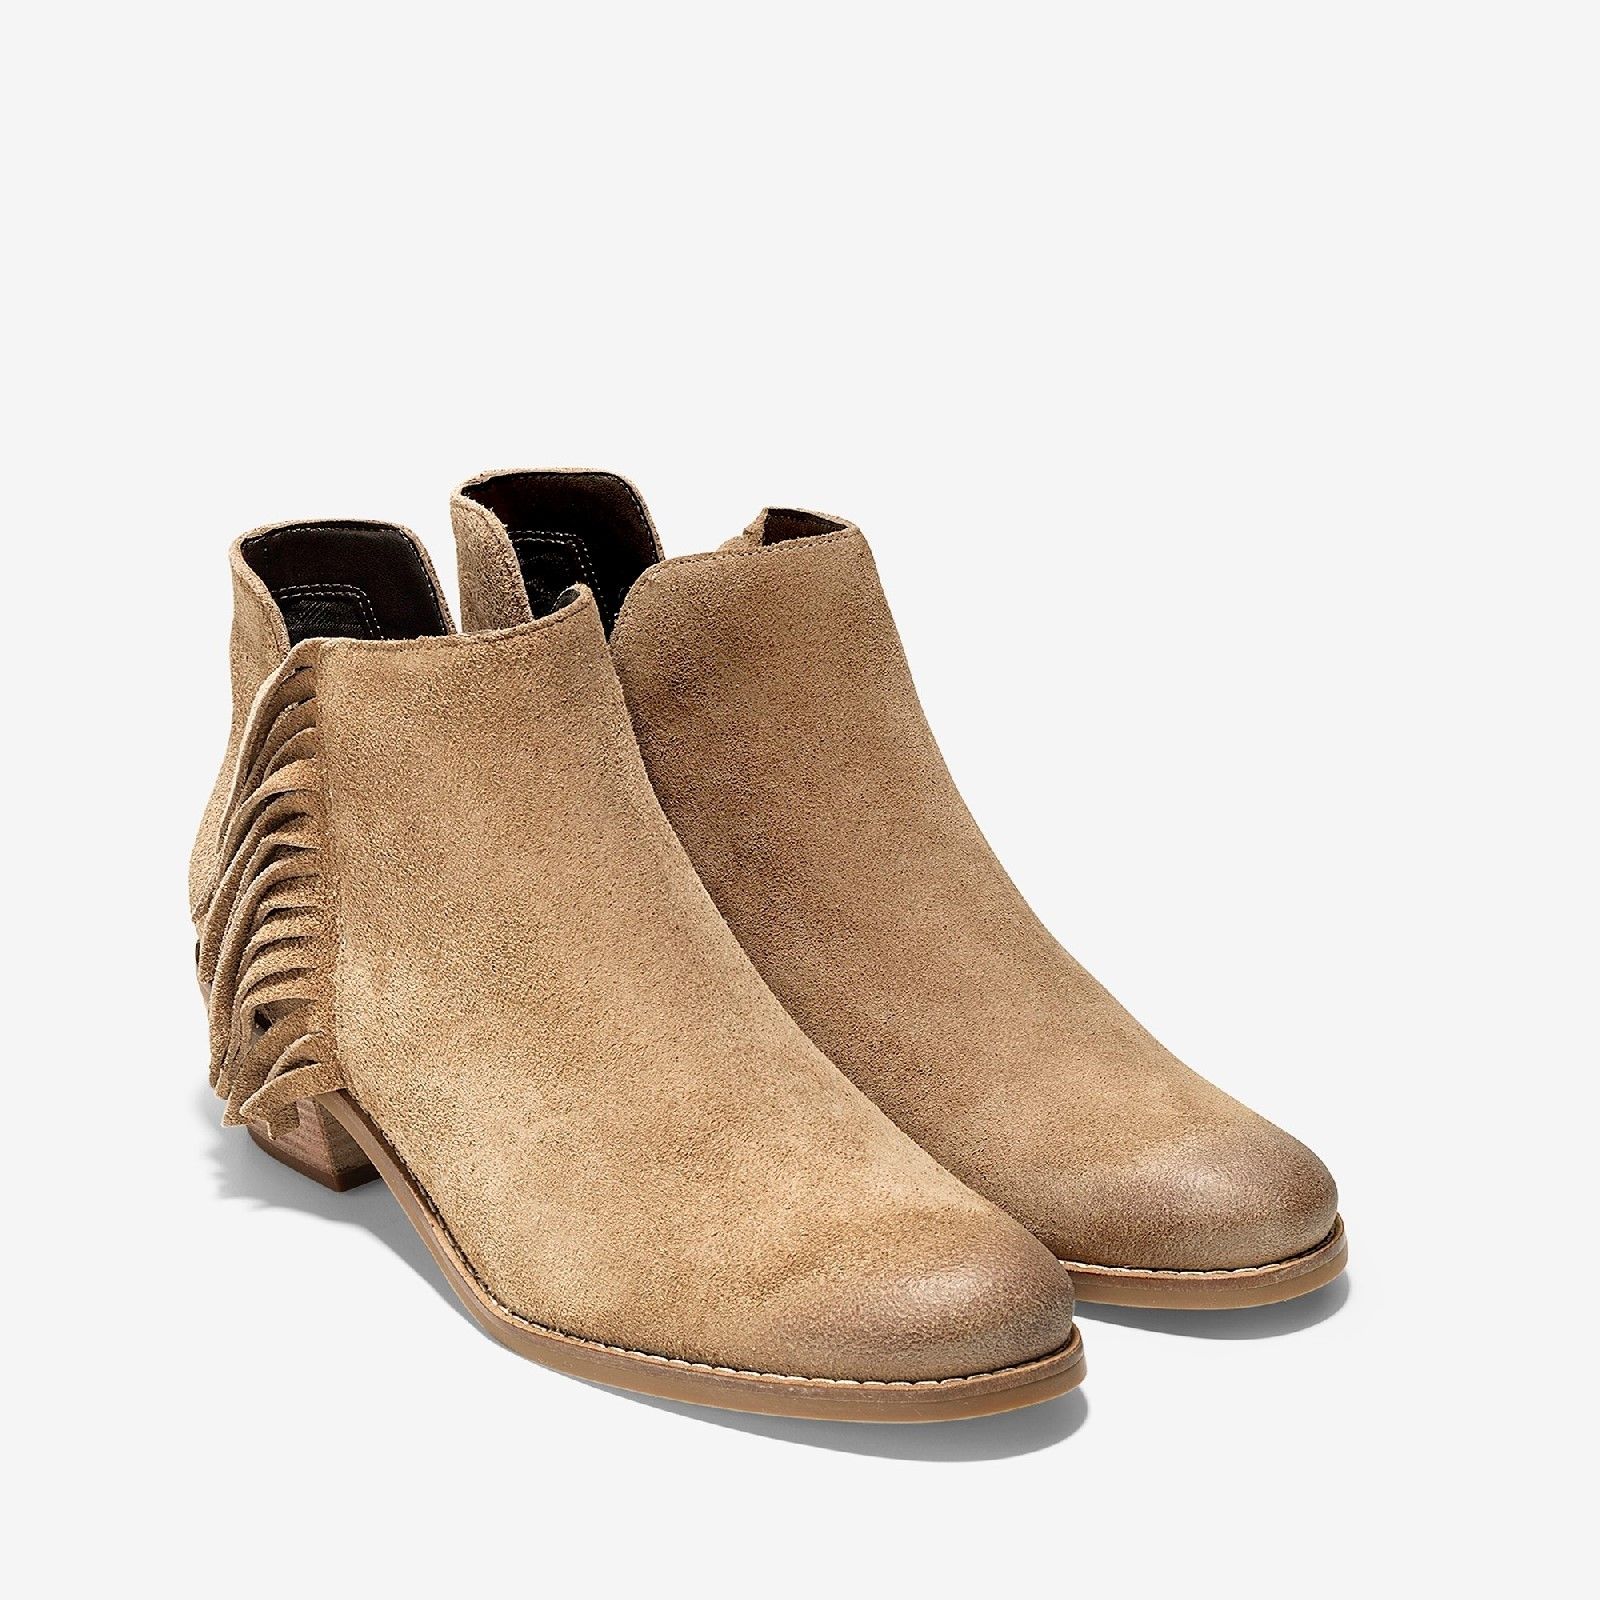 These urban, cowgirl-chic ankle boots are crafted in rich leather and feature dual side cut-outs that add the perfect amount of edgy flair. Suede upper with fringe detail and hidden side gore for easy entry.. 
Fully lined.. 
Full rubber outsole with welt and GRAND/OS technology for comfort and stability.. 
45mm stacked heel..